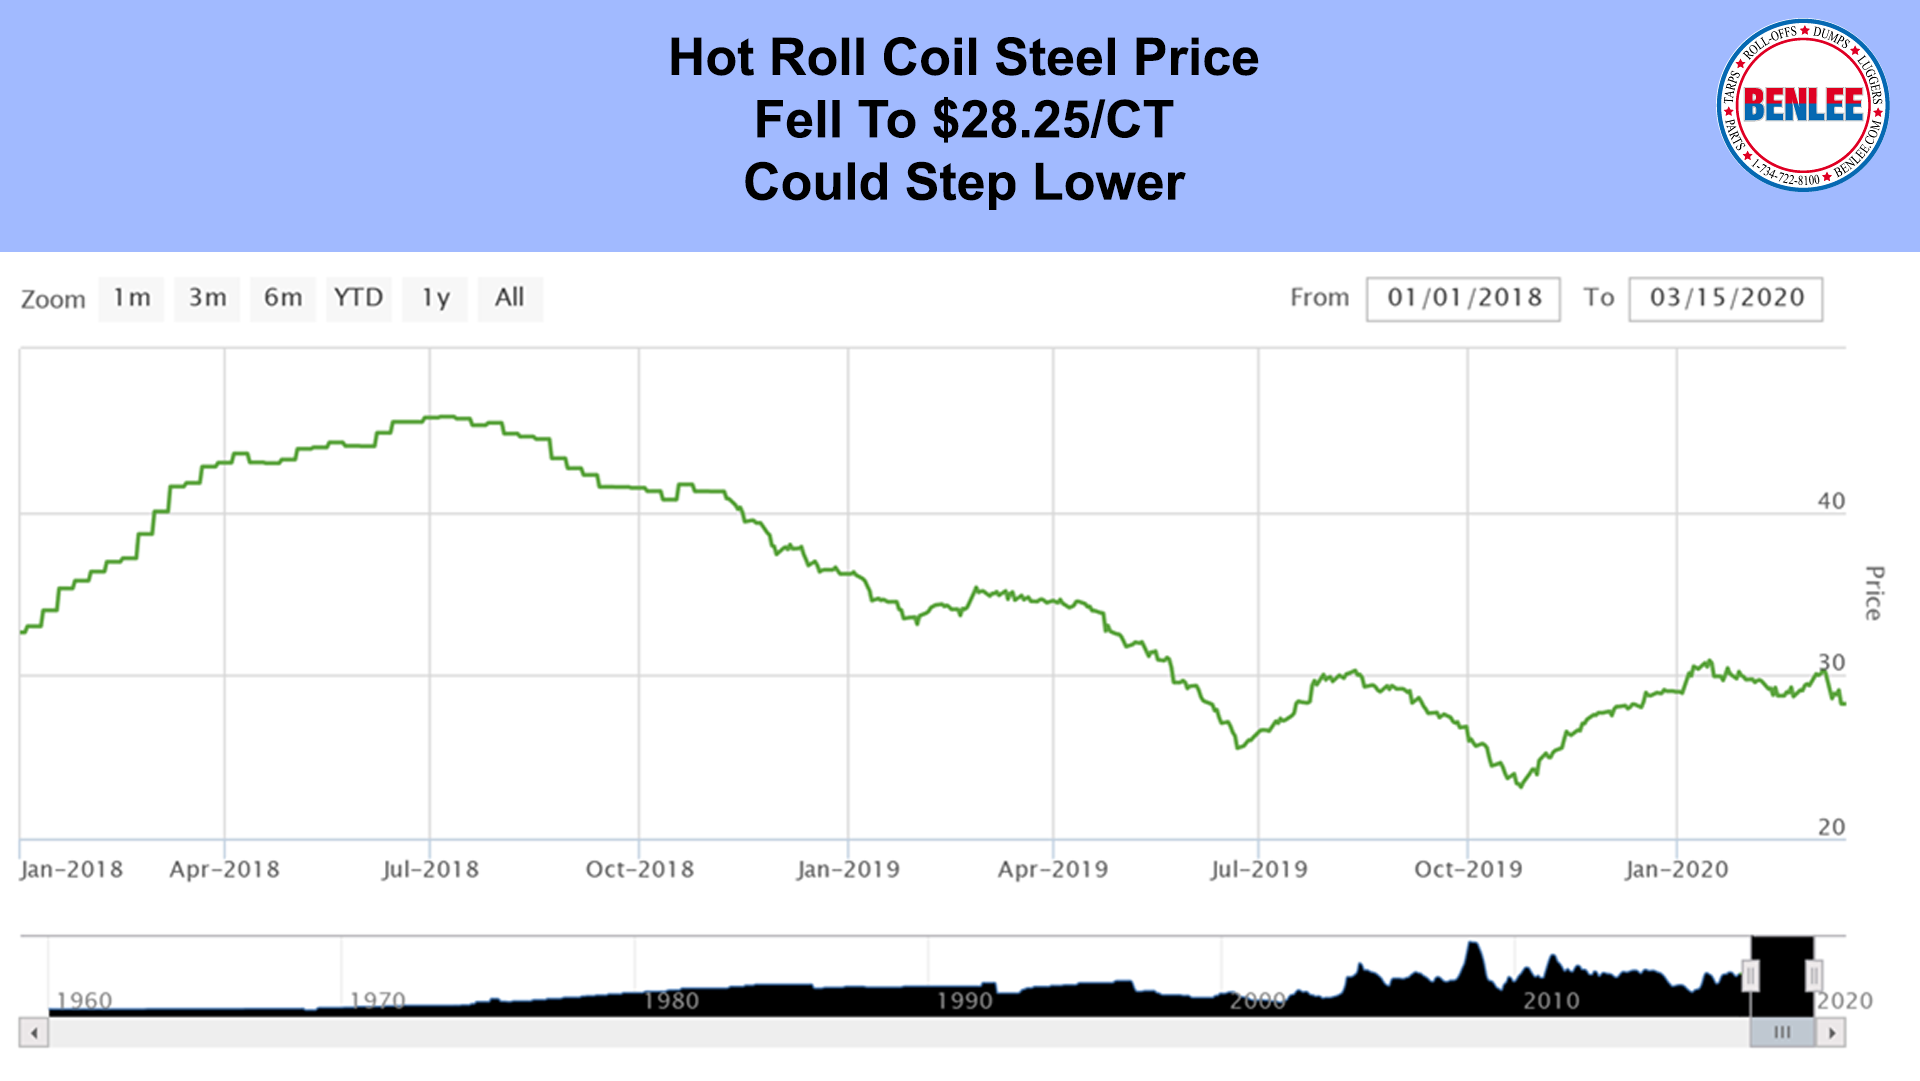 Hot Roll Coil Steel